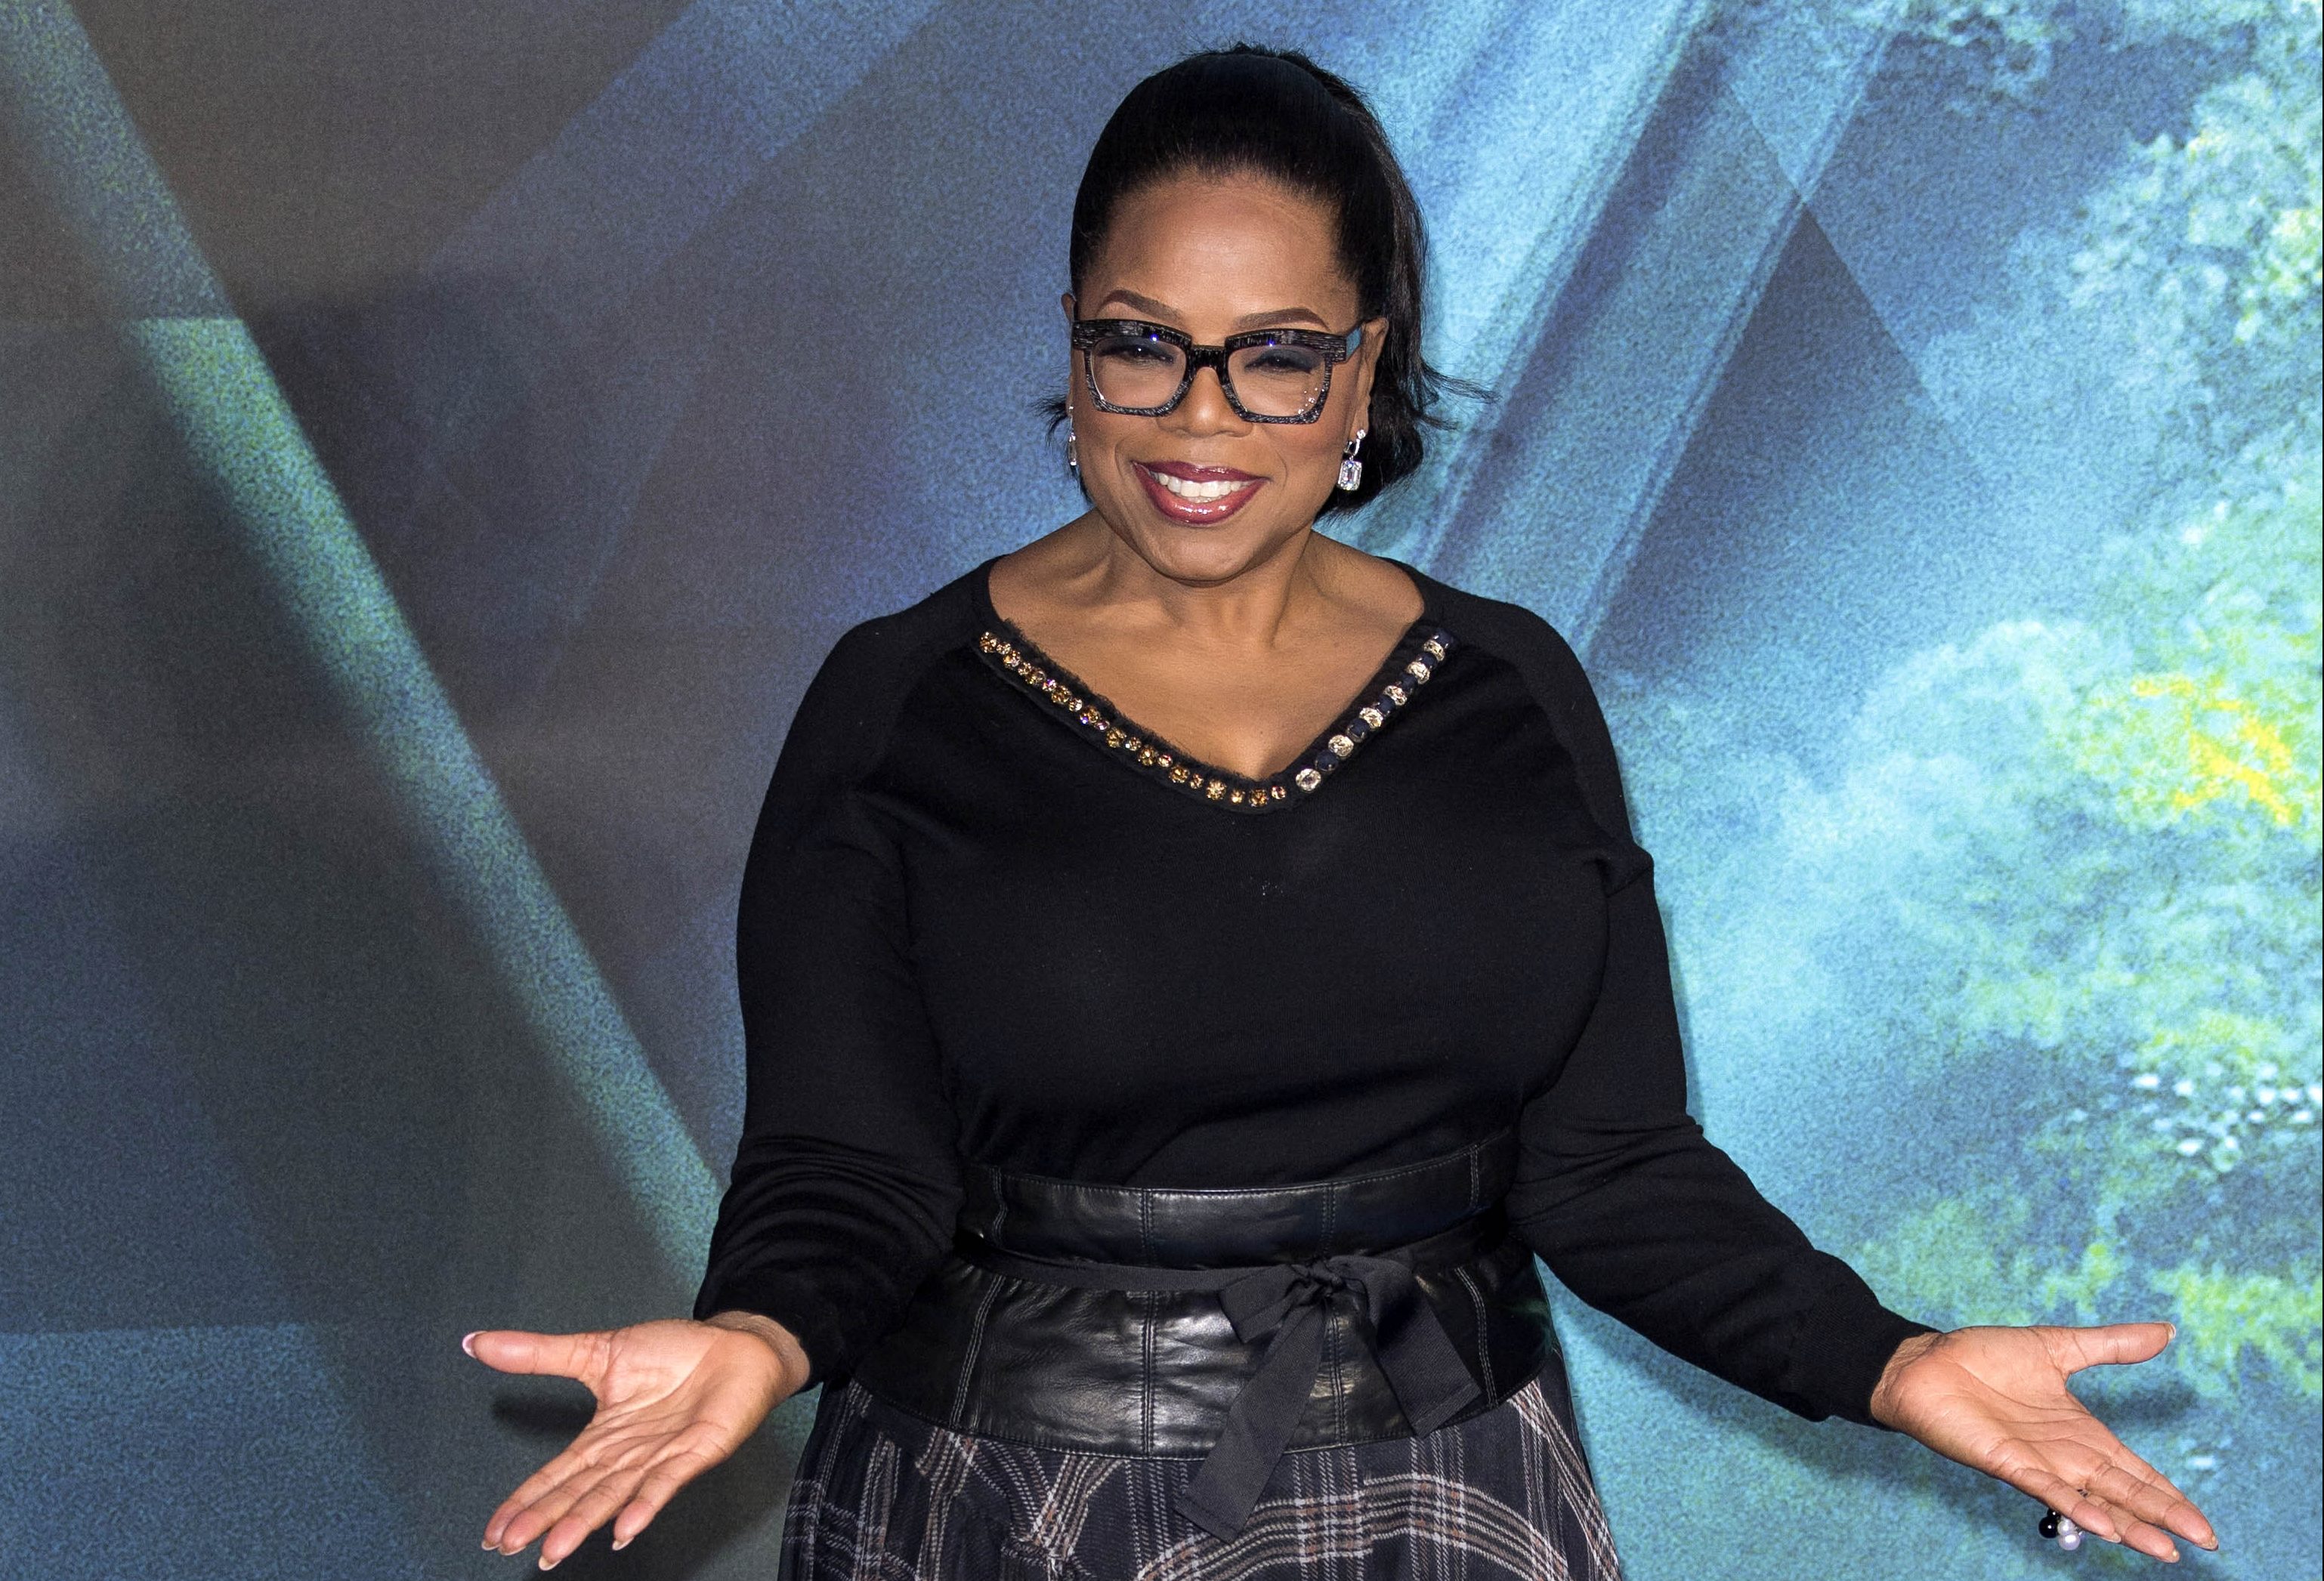 European premiere of 'A Wrinkle in Time'